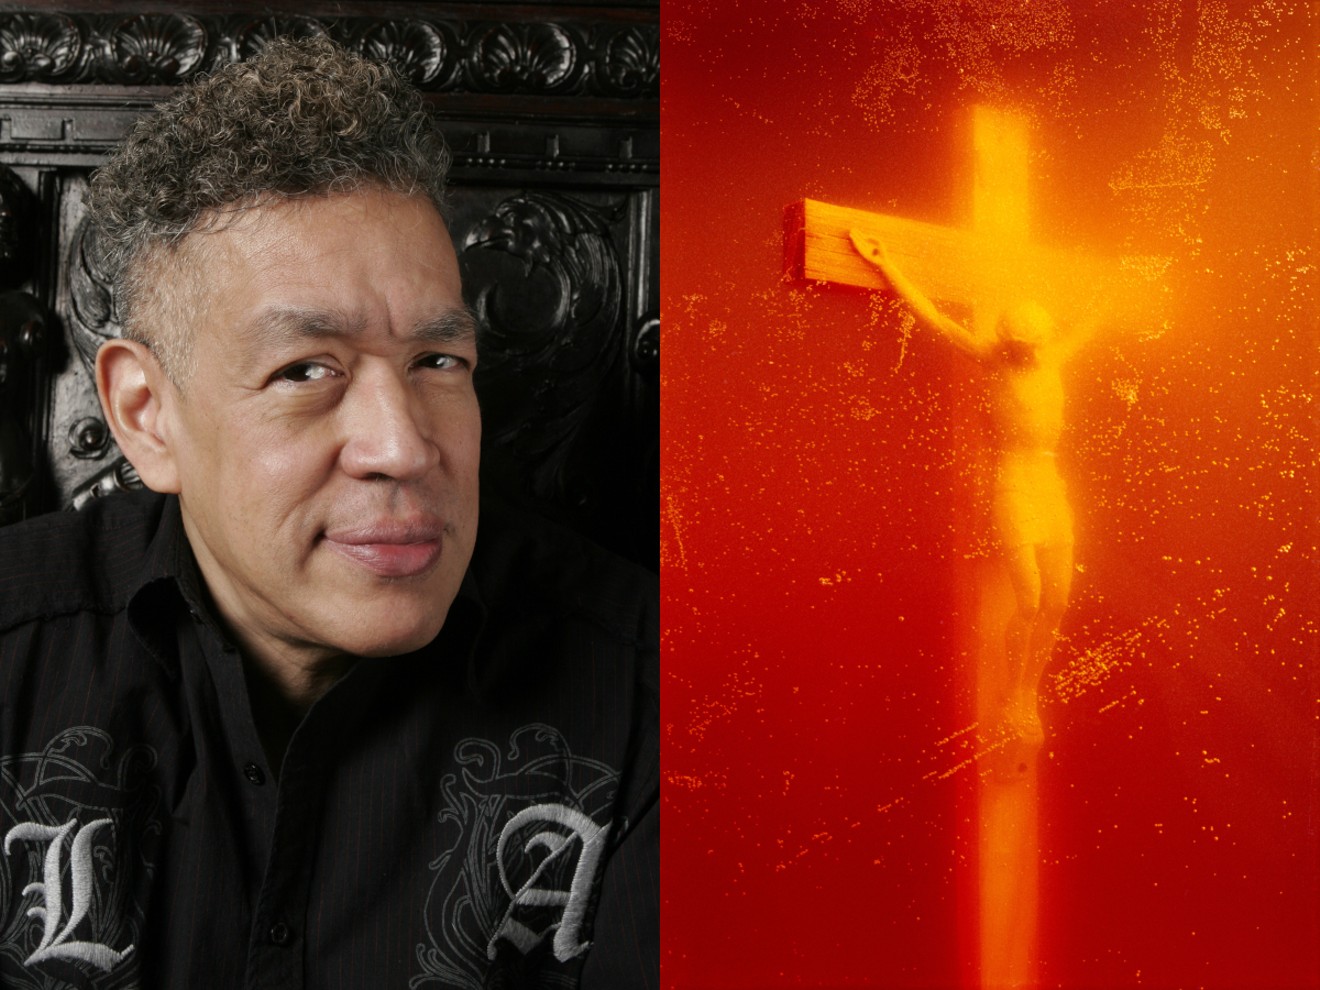 Since its debut in 1987, Andres Serrano's Piss Christ has been mired in controversy.